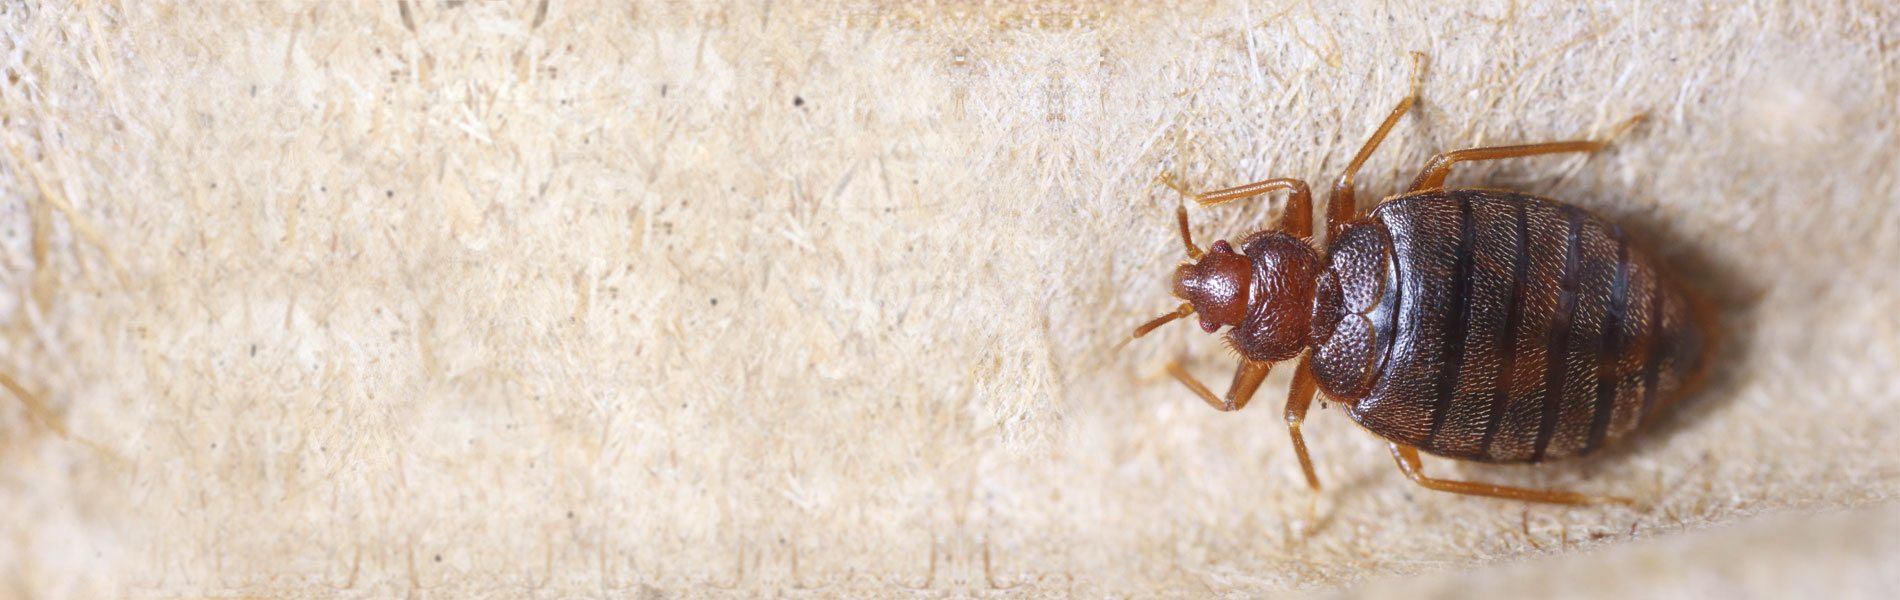 Pest Control Services - Bed Bug Control